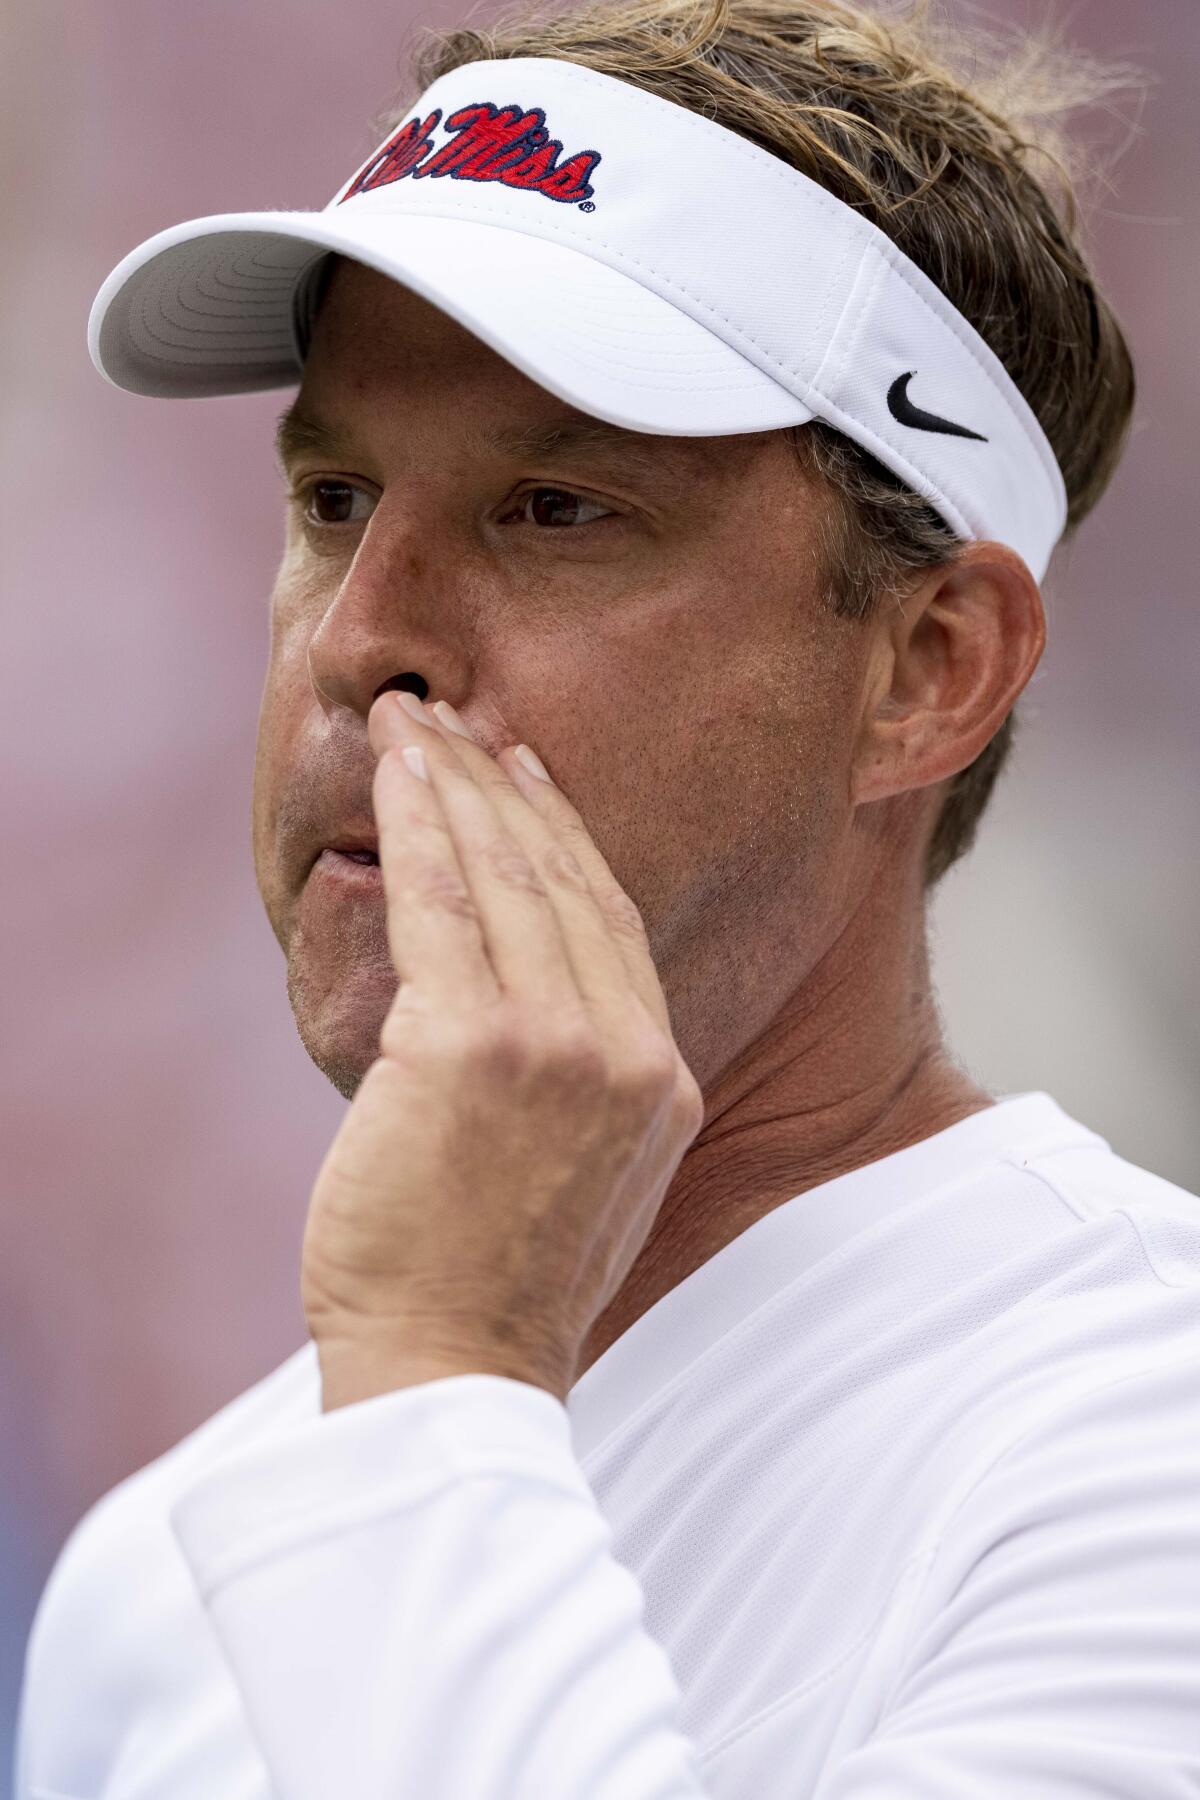 Mississippi head coach Lane Kiffin whistles to a player during warm-ups before an NCAA college football game against Alabama, Saturday, Oct. 2, 2021, in Tuscaloosa, Ala. (AP Photo/Vasha Hunt)